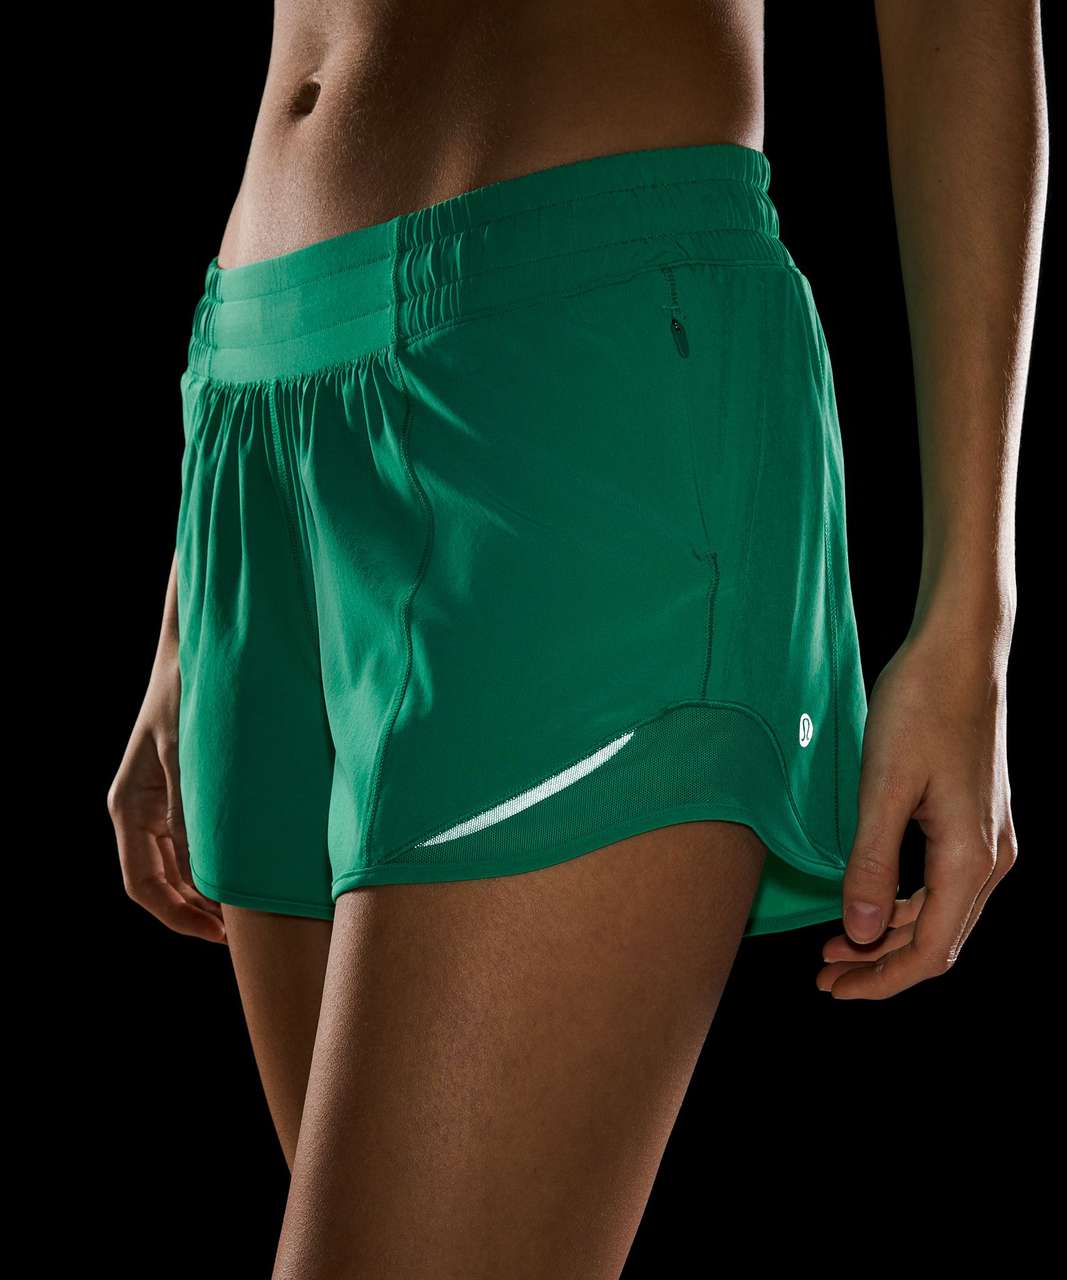 Lululemon Hotty Hot Low-Rise Lined Short 4" - Kelly Green